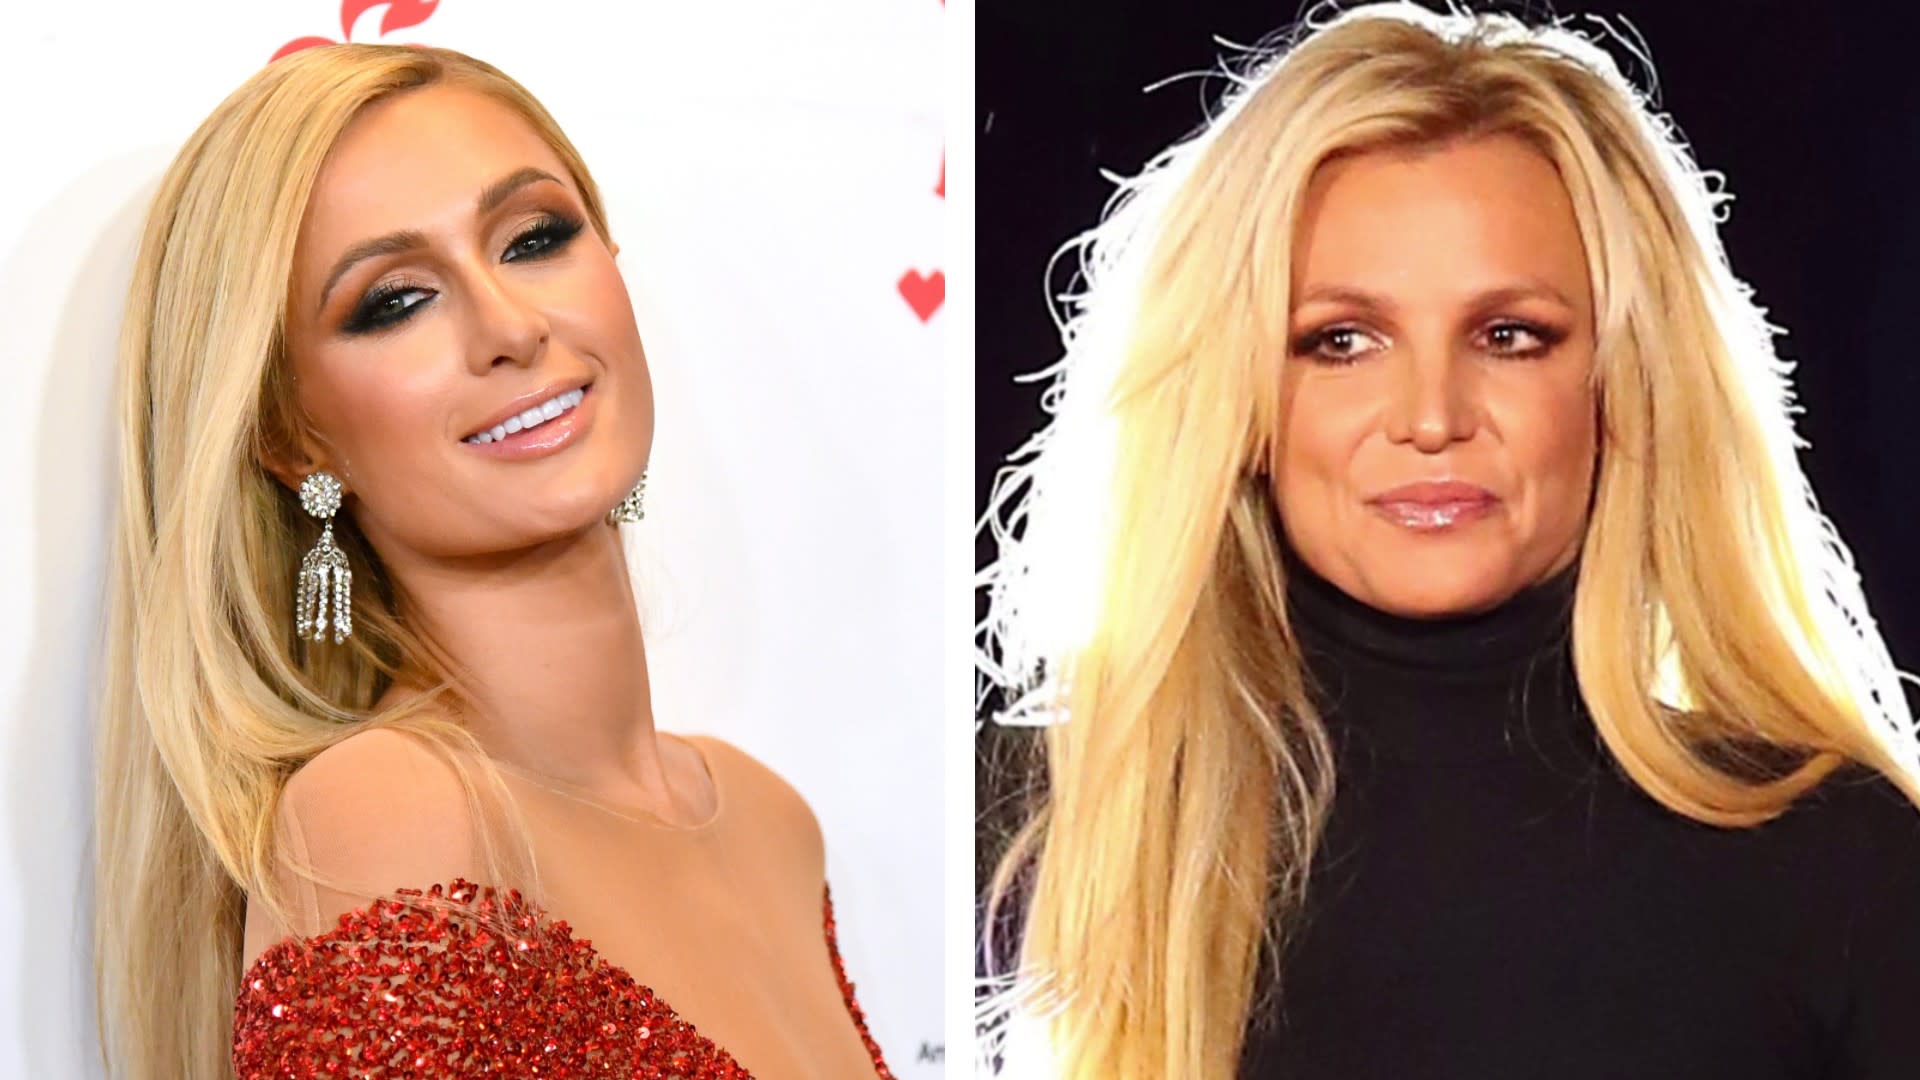 StyleCaster on X: Cooking is hot, just like @ParisHilton's new